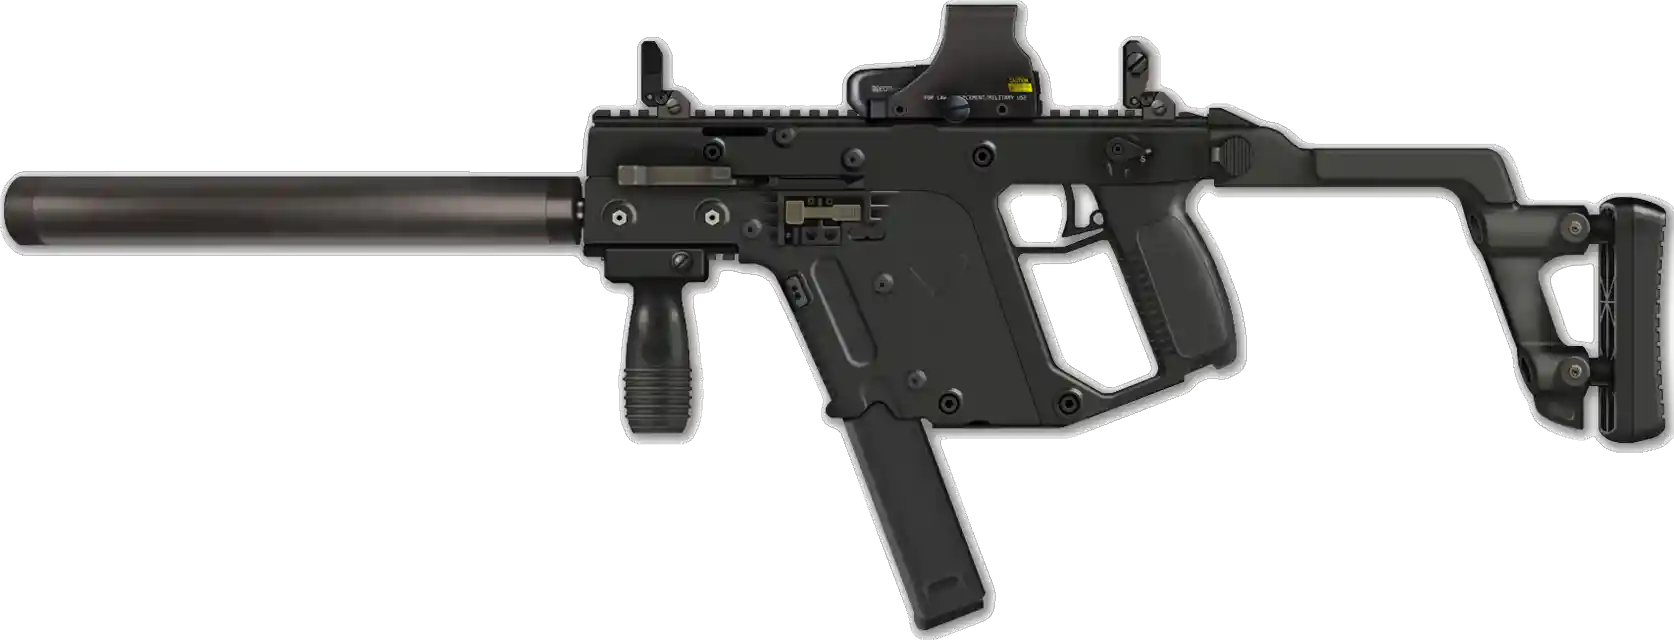 Kriss_Vector_SMG_Realistic.png